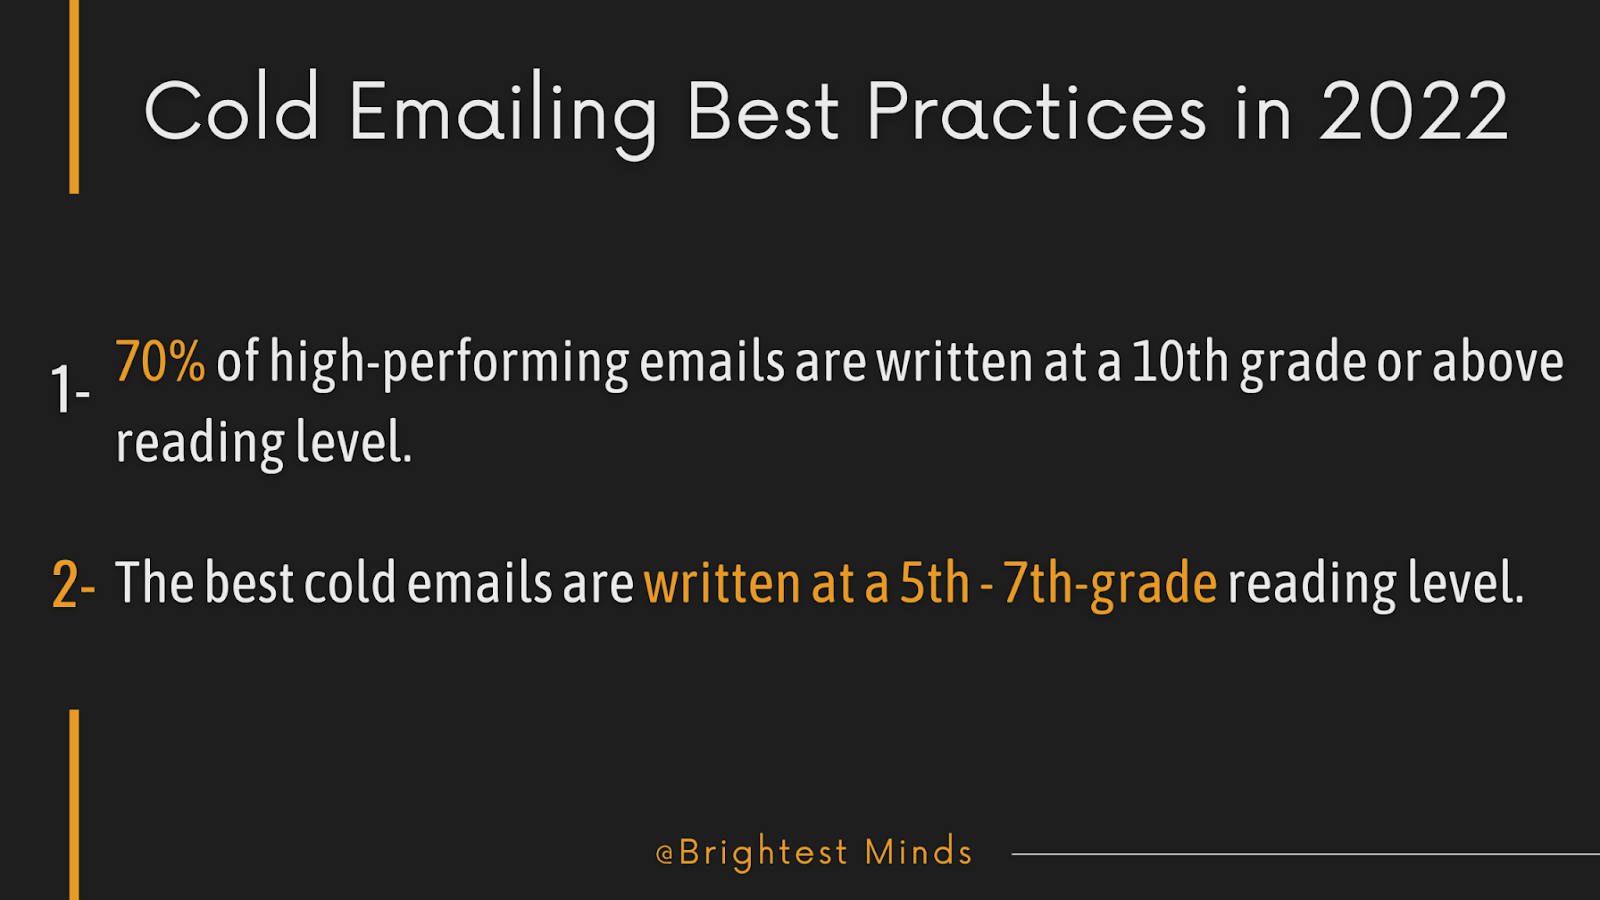 Cold emailing best practices 2022